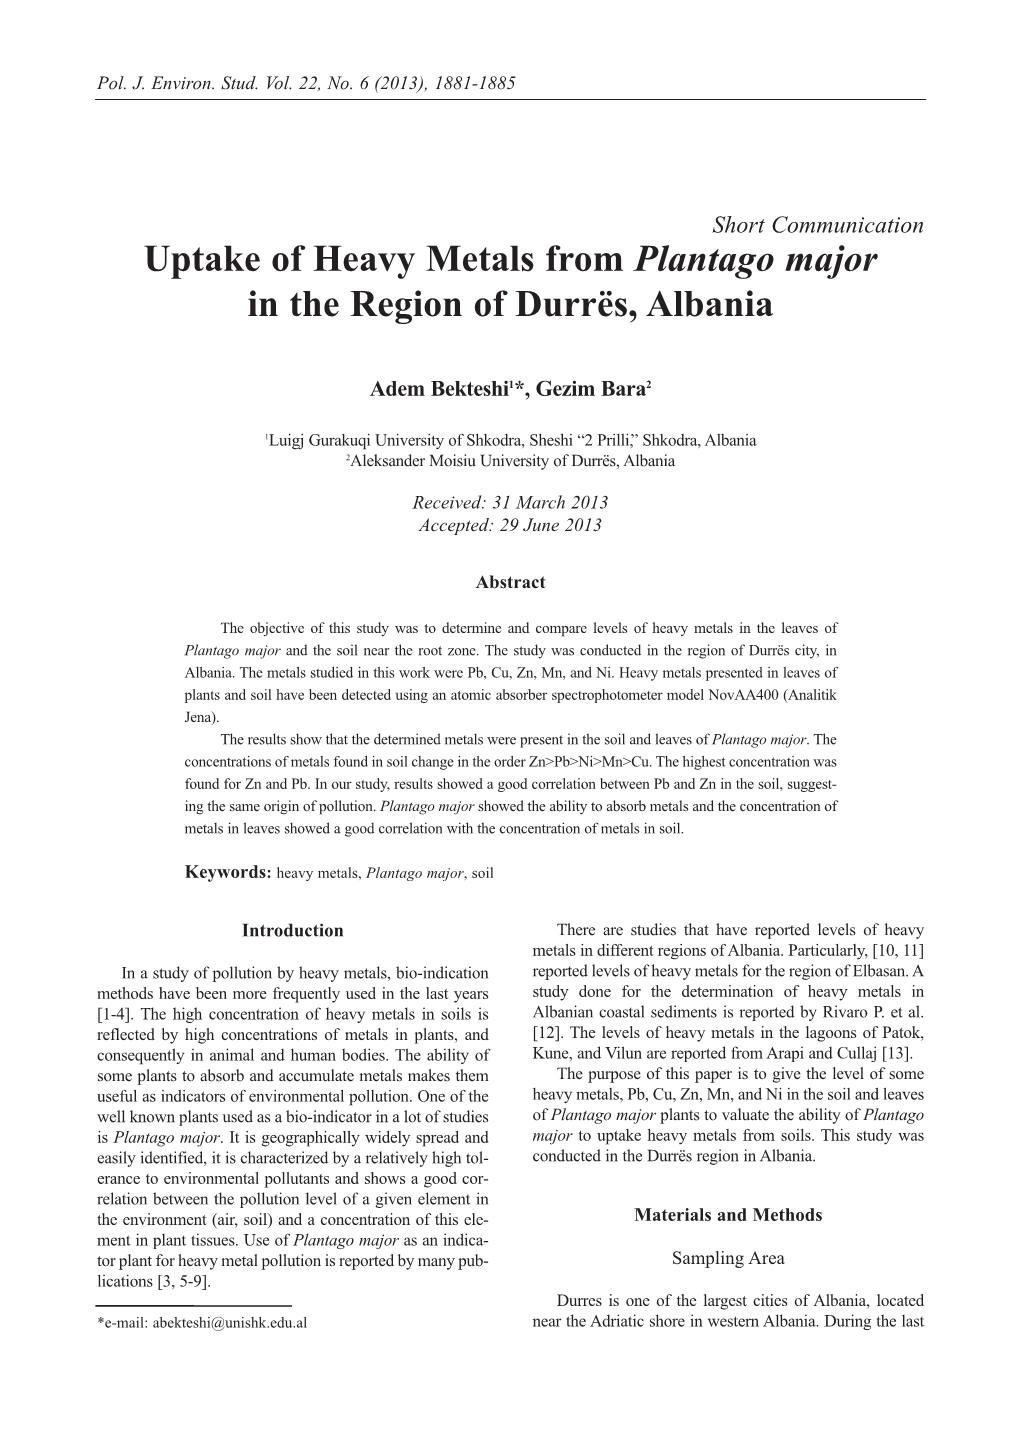 Uptake of Heavy Metals from Plantago Major in the Region of Durrës, Albania